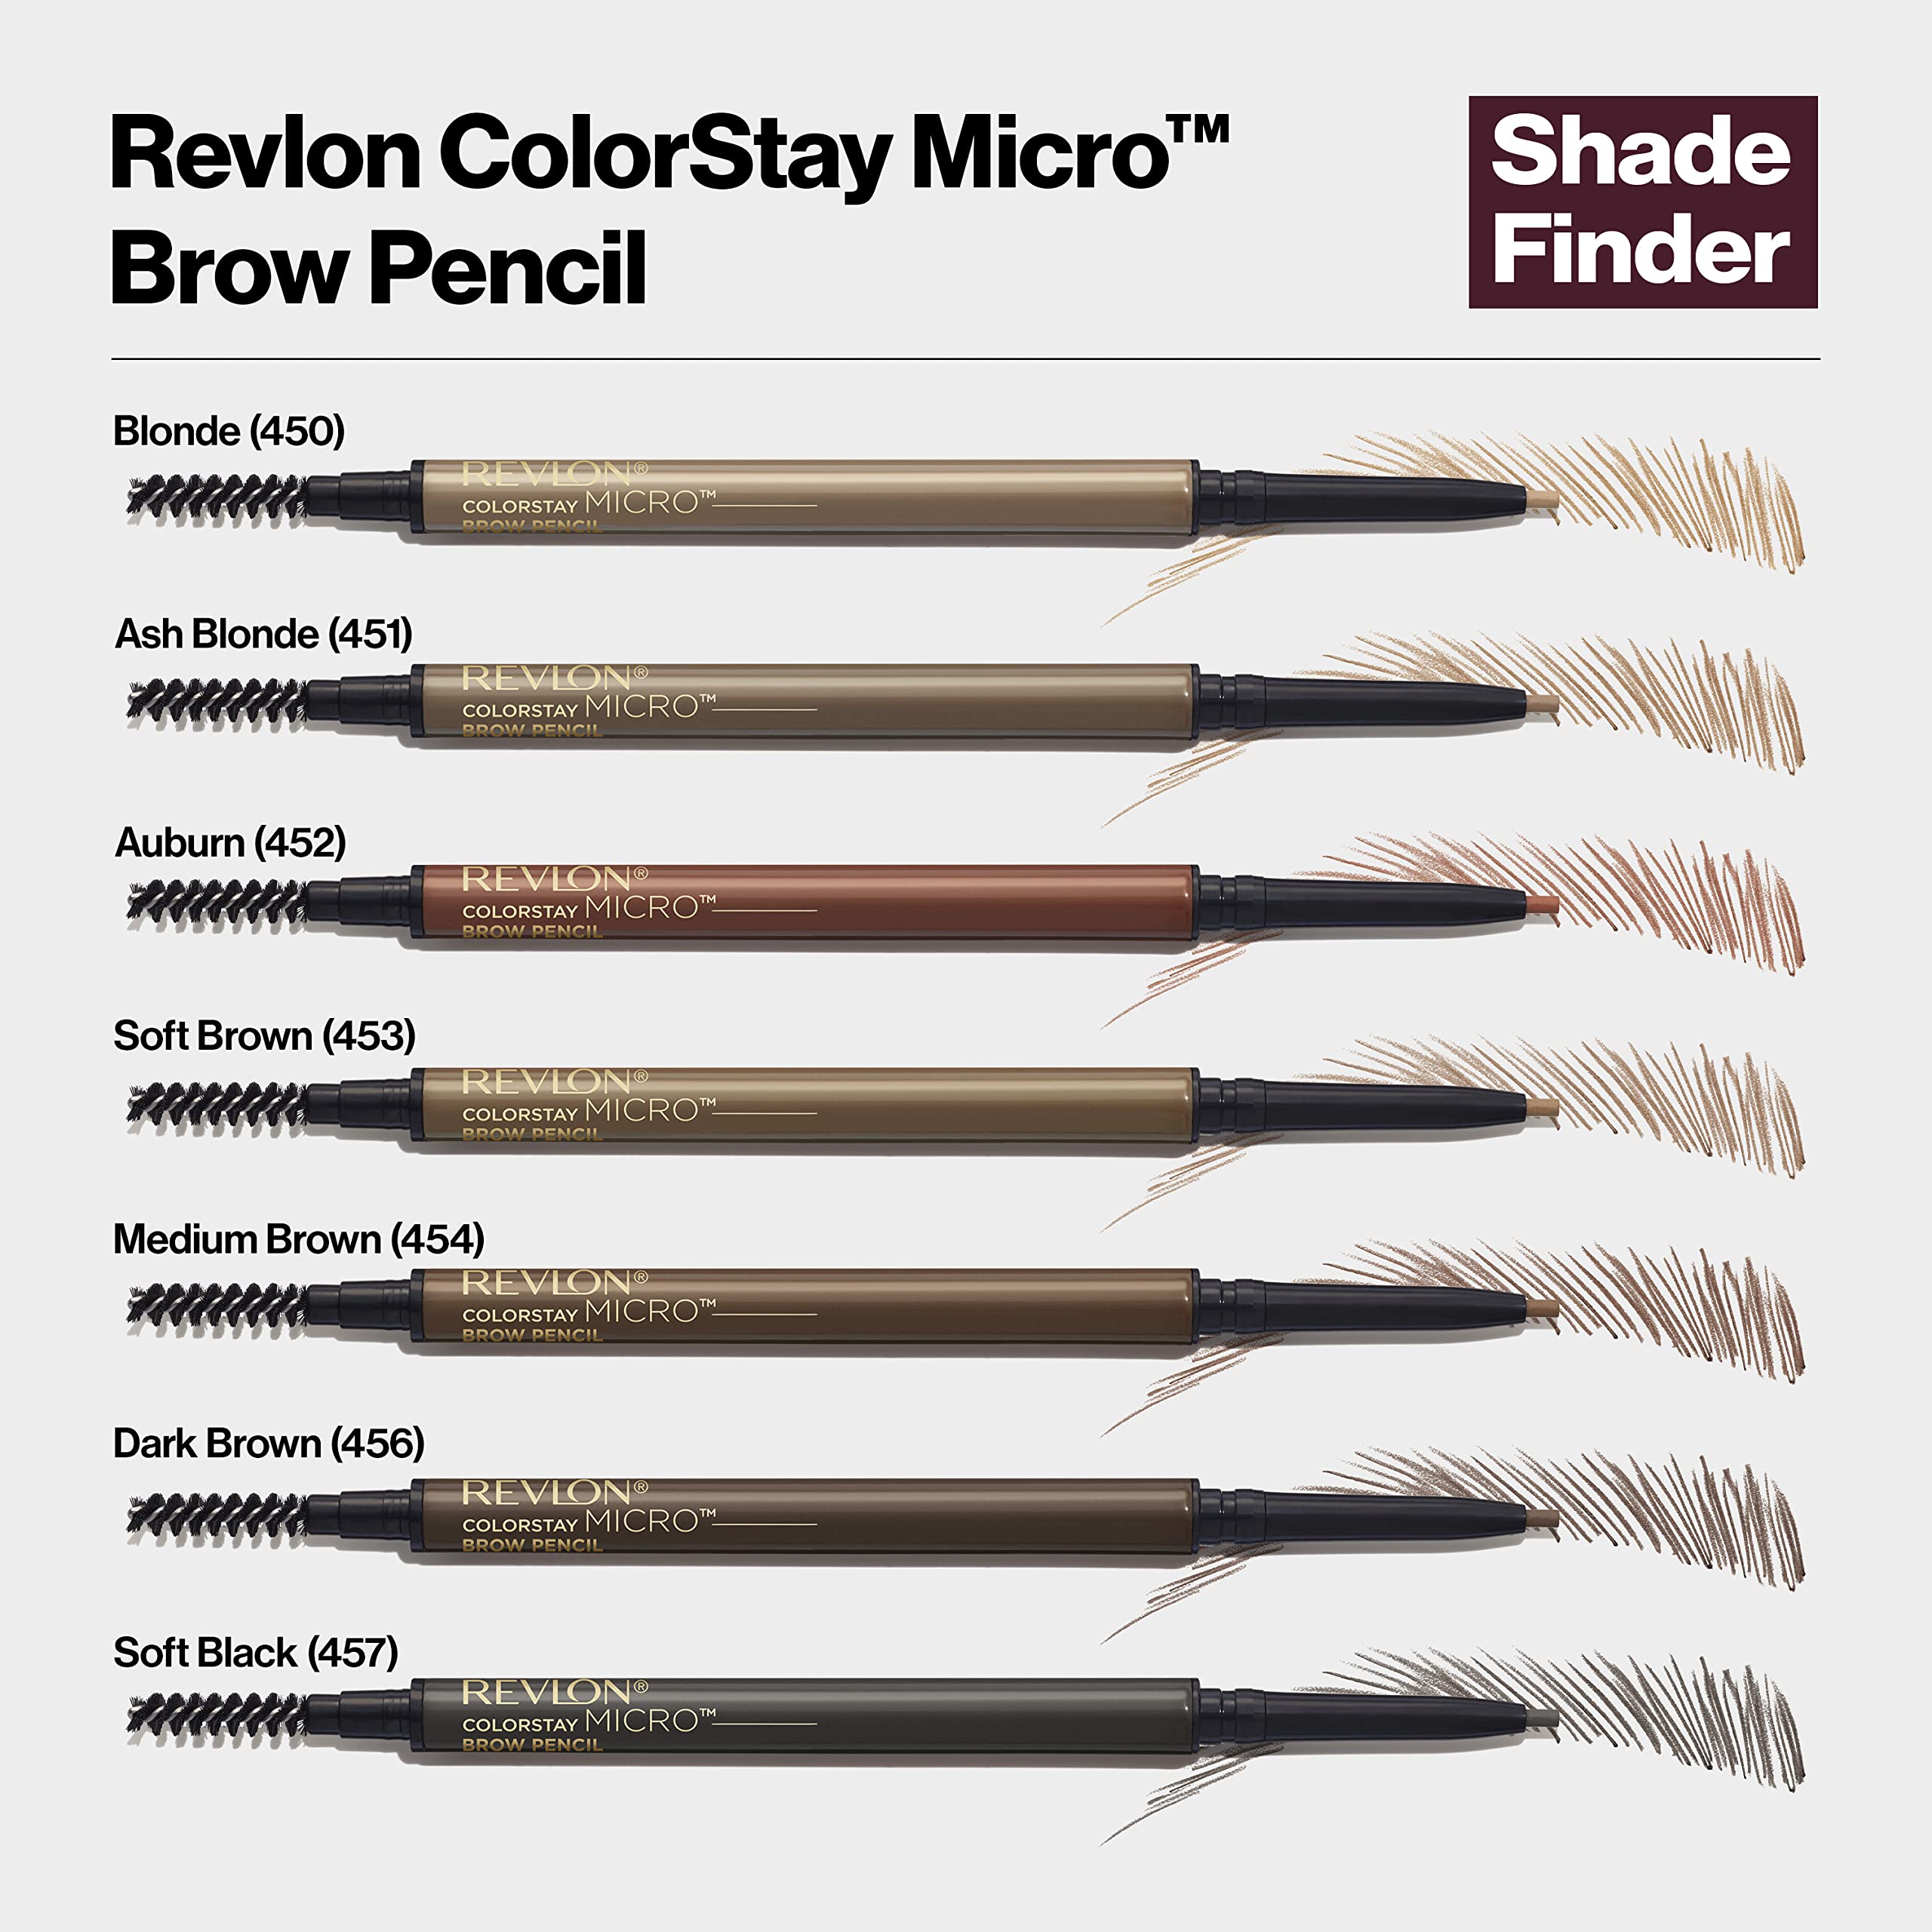 Revlon ColorStay Micro Eyebrow Pencil with Built In Spoolie Brush, Infused with Argan and Marula Oil, Waterproof, Smudgeproof, 456 Dark Brown (Pack of 1)